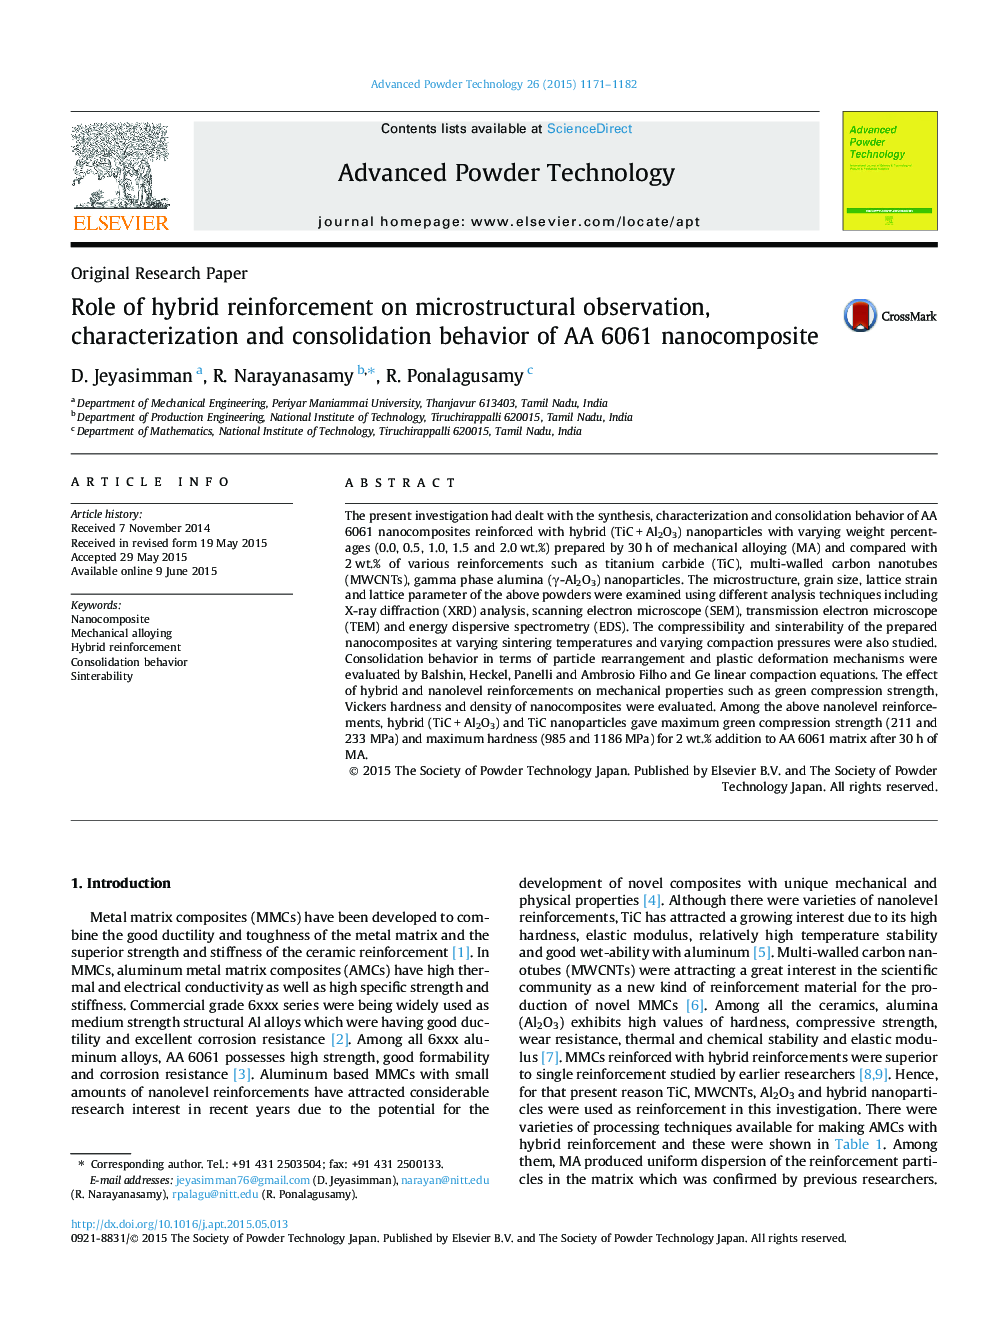 Role of hybrid reinforcement on microstructural observation, characterization and consolidation behavior of AA 6061 nanocomposite